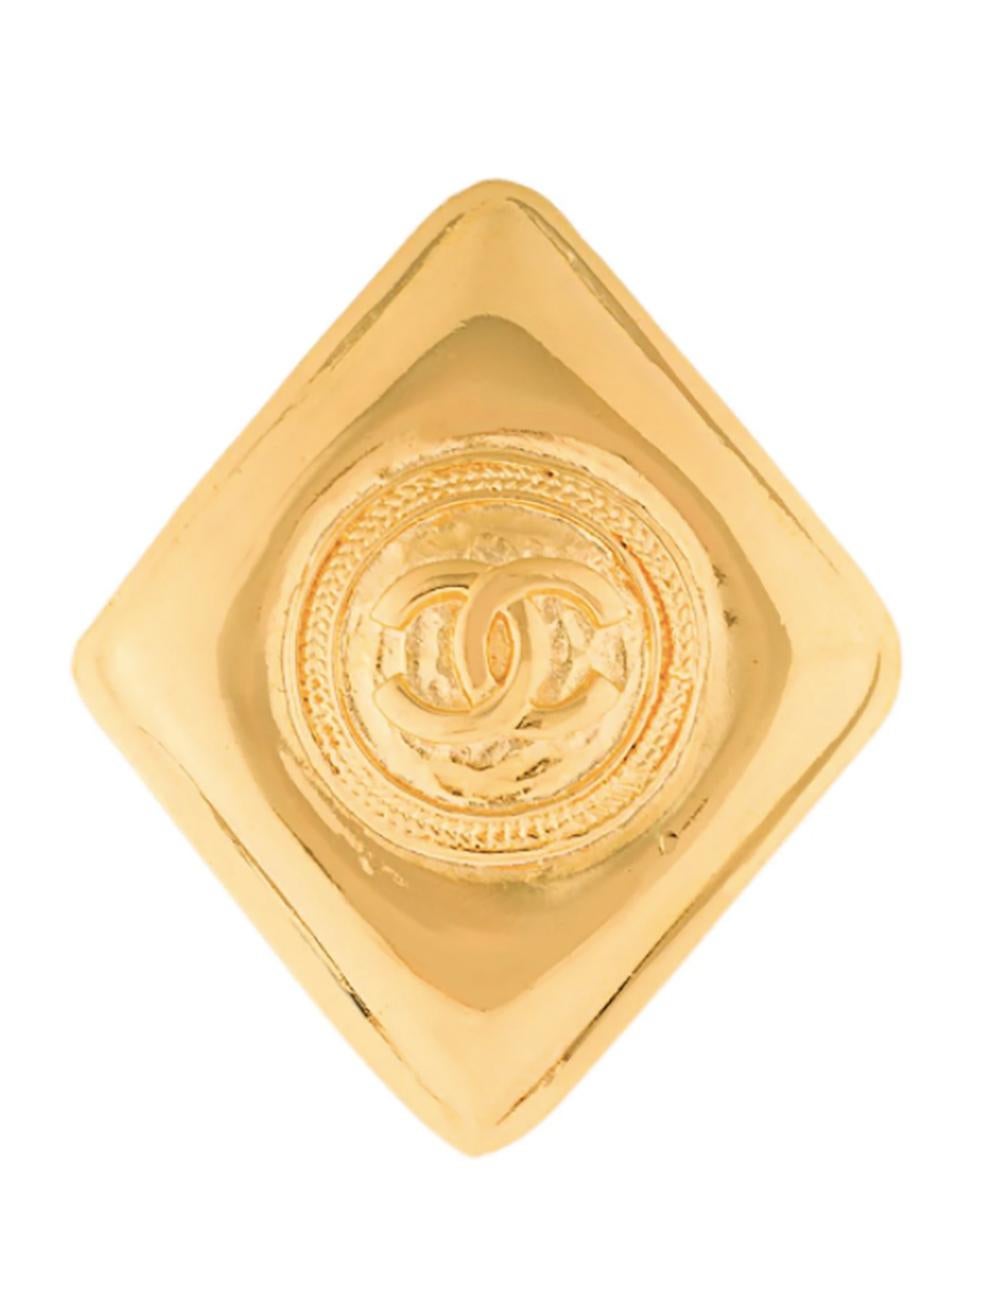 1980s Gold-tone logo Chanel brooch featuring a diamond shape, signature interlocking CC logo, a logo plaque at back and a safety pin.
Width: 4cm
Maxi Length:5cm
In good vintage condition. Made in France.
We guarantee you will receive this  iconic